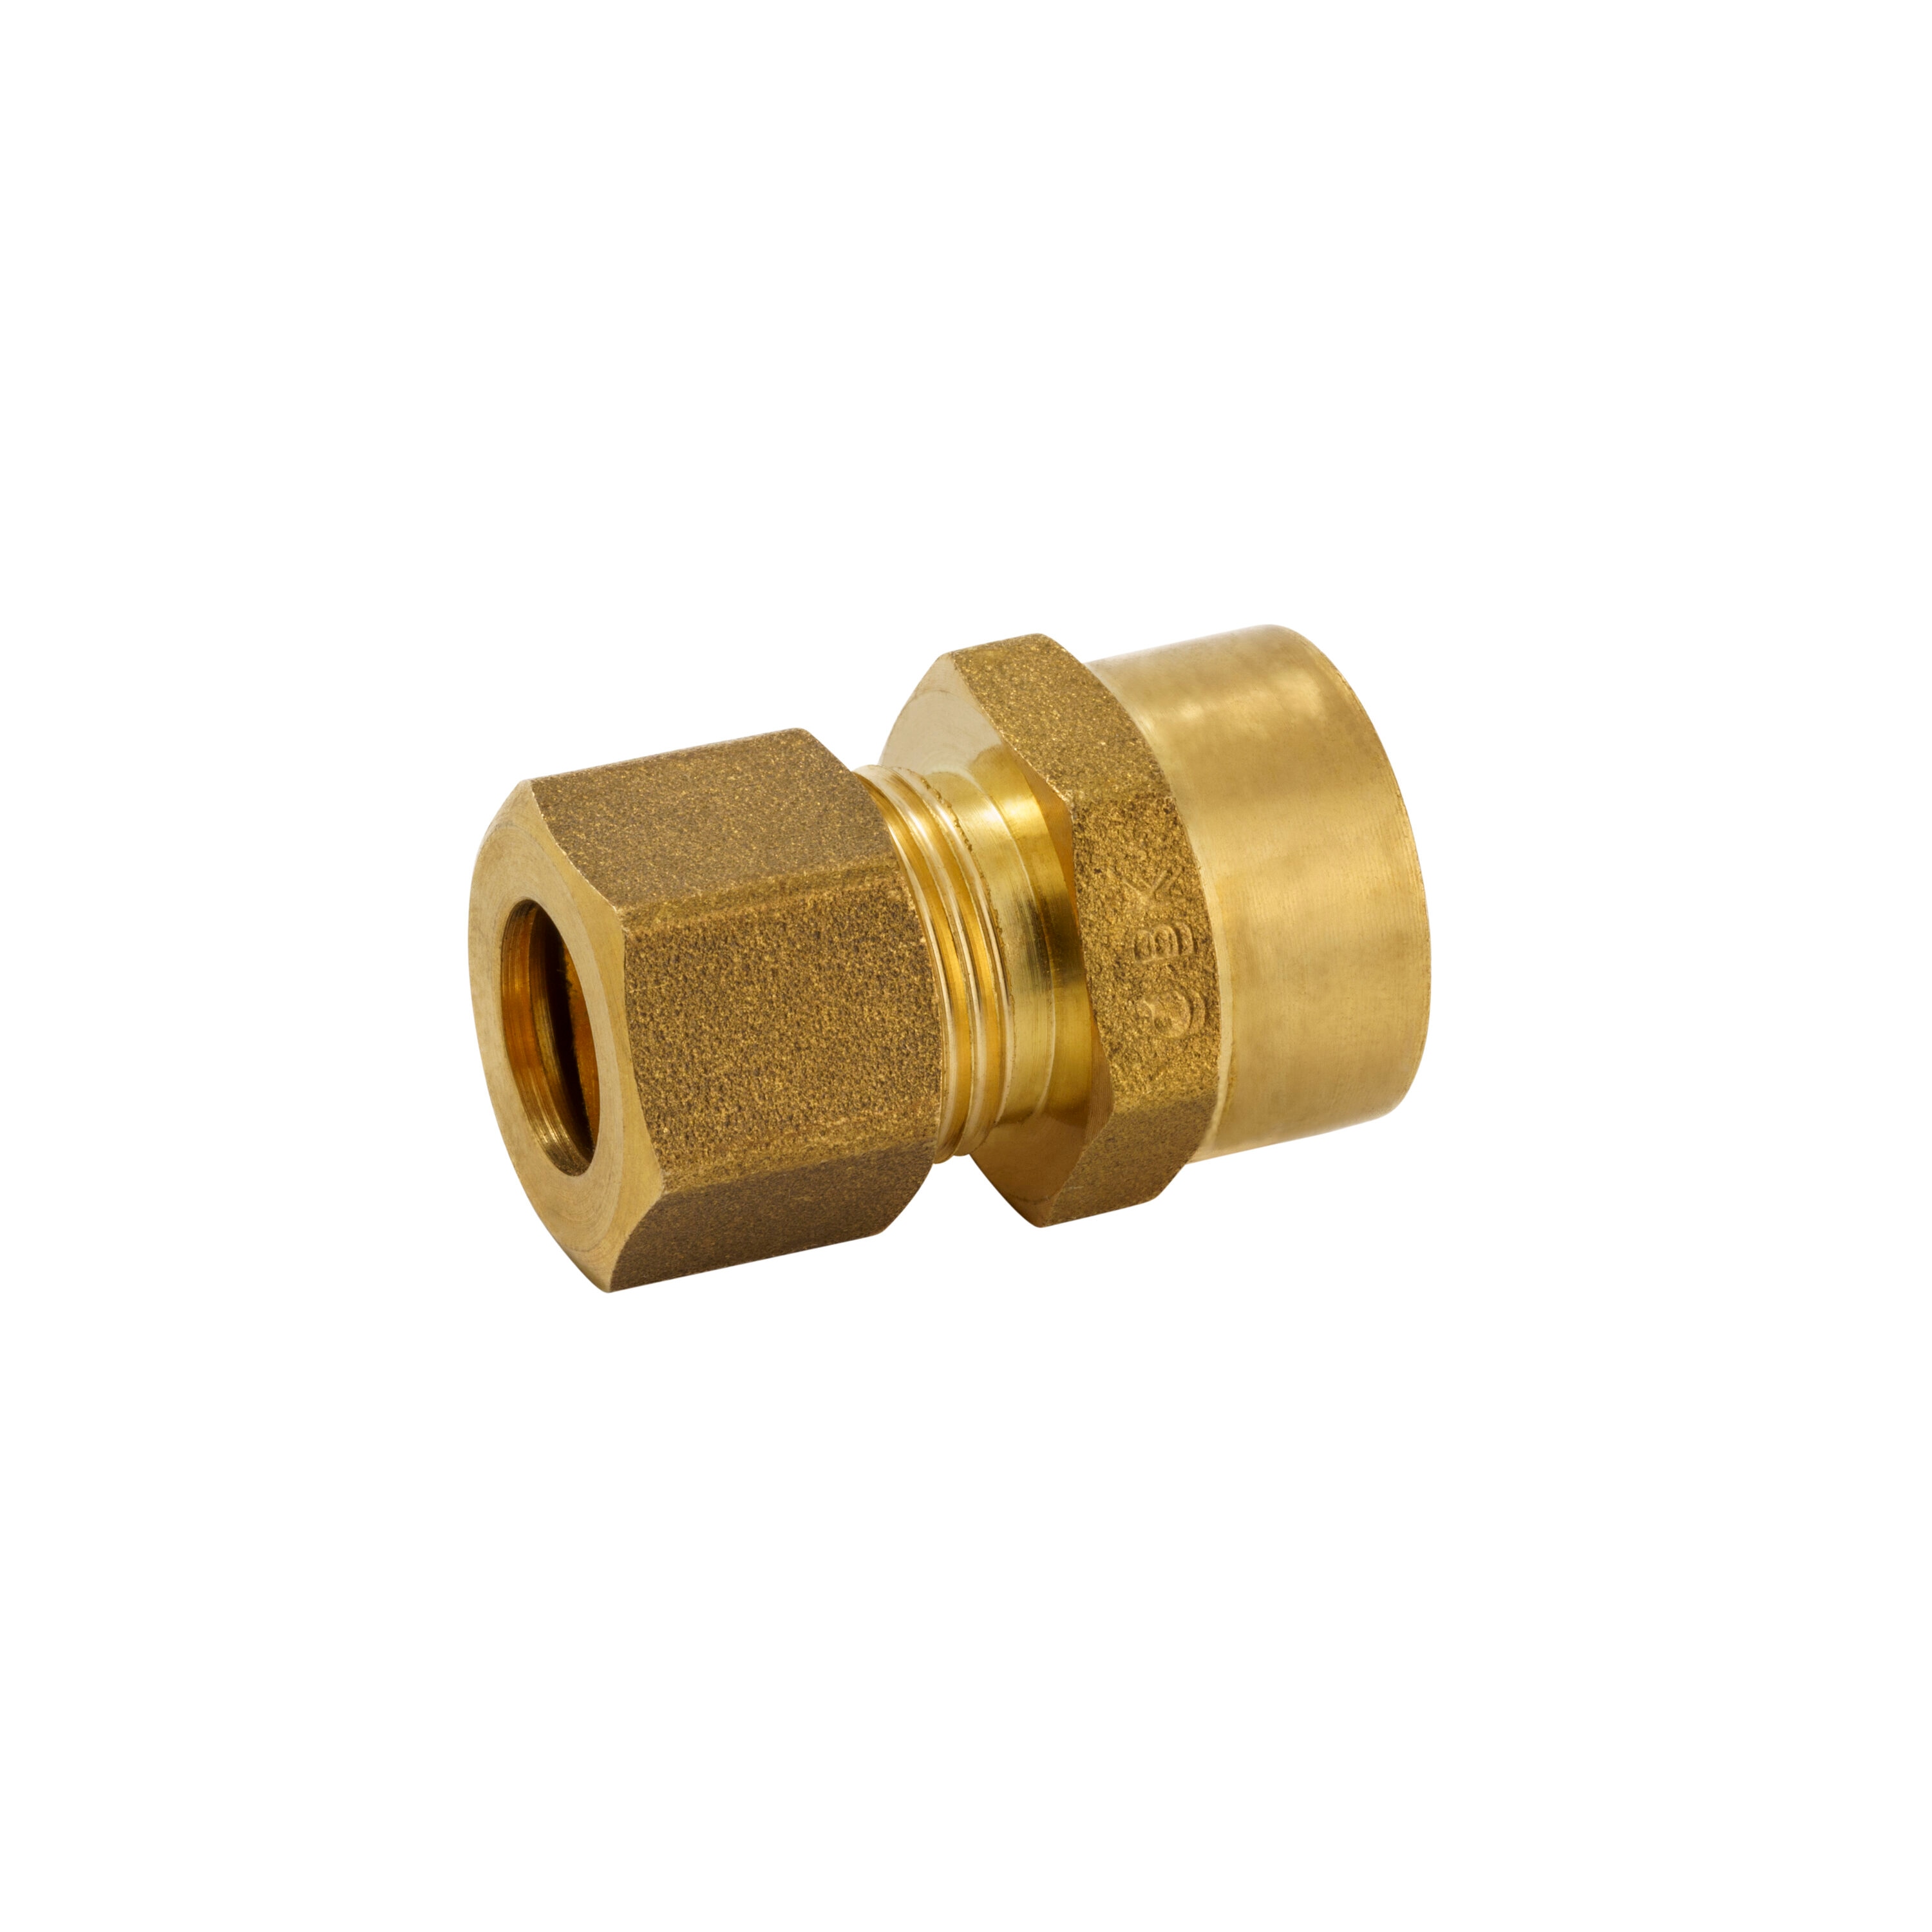 Proline Series 3/8-in x 1/2-in Compression Adapter Fitting in the